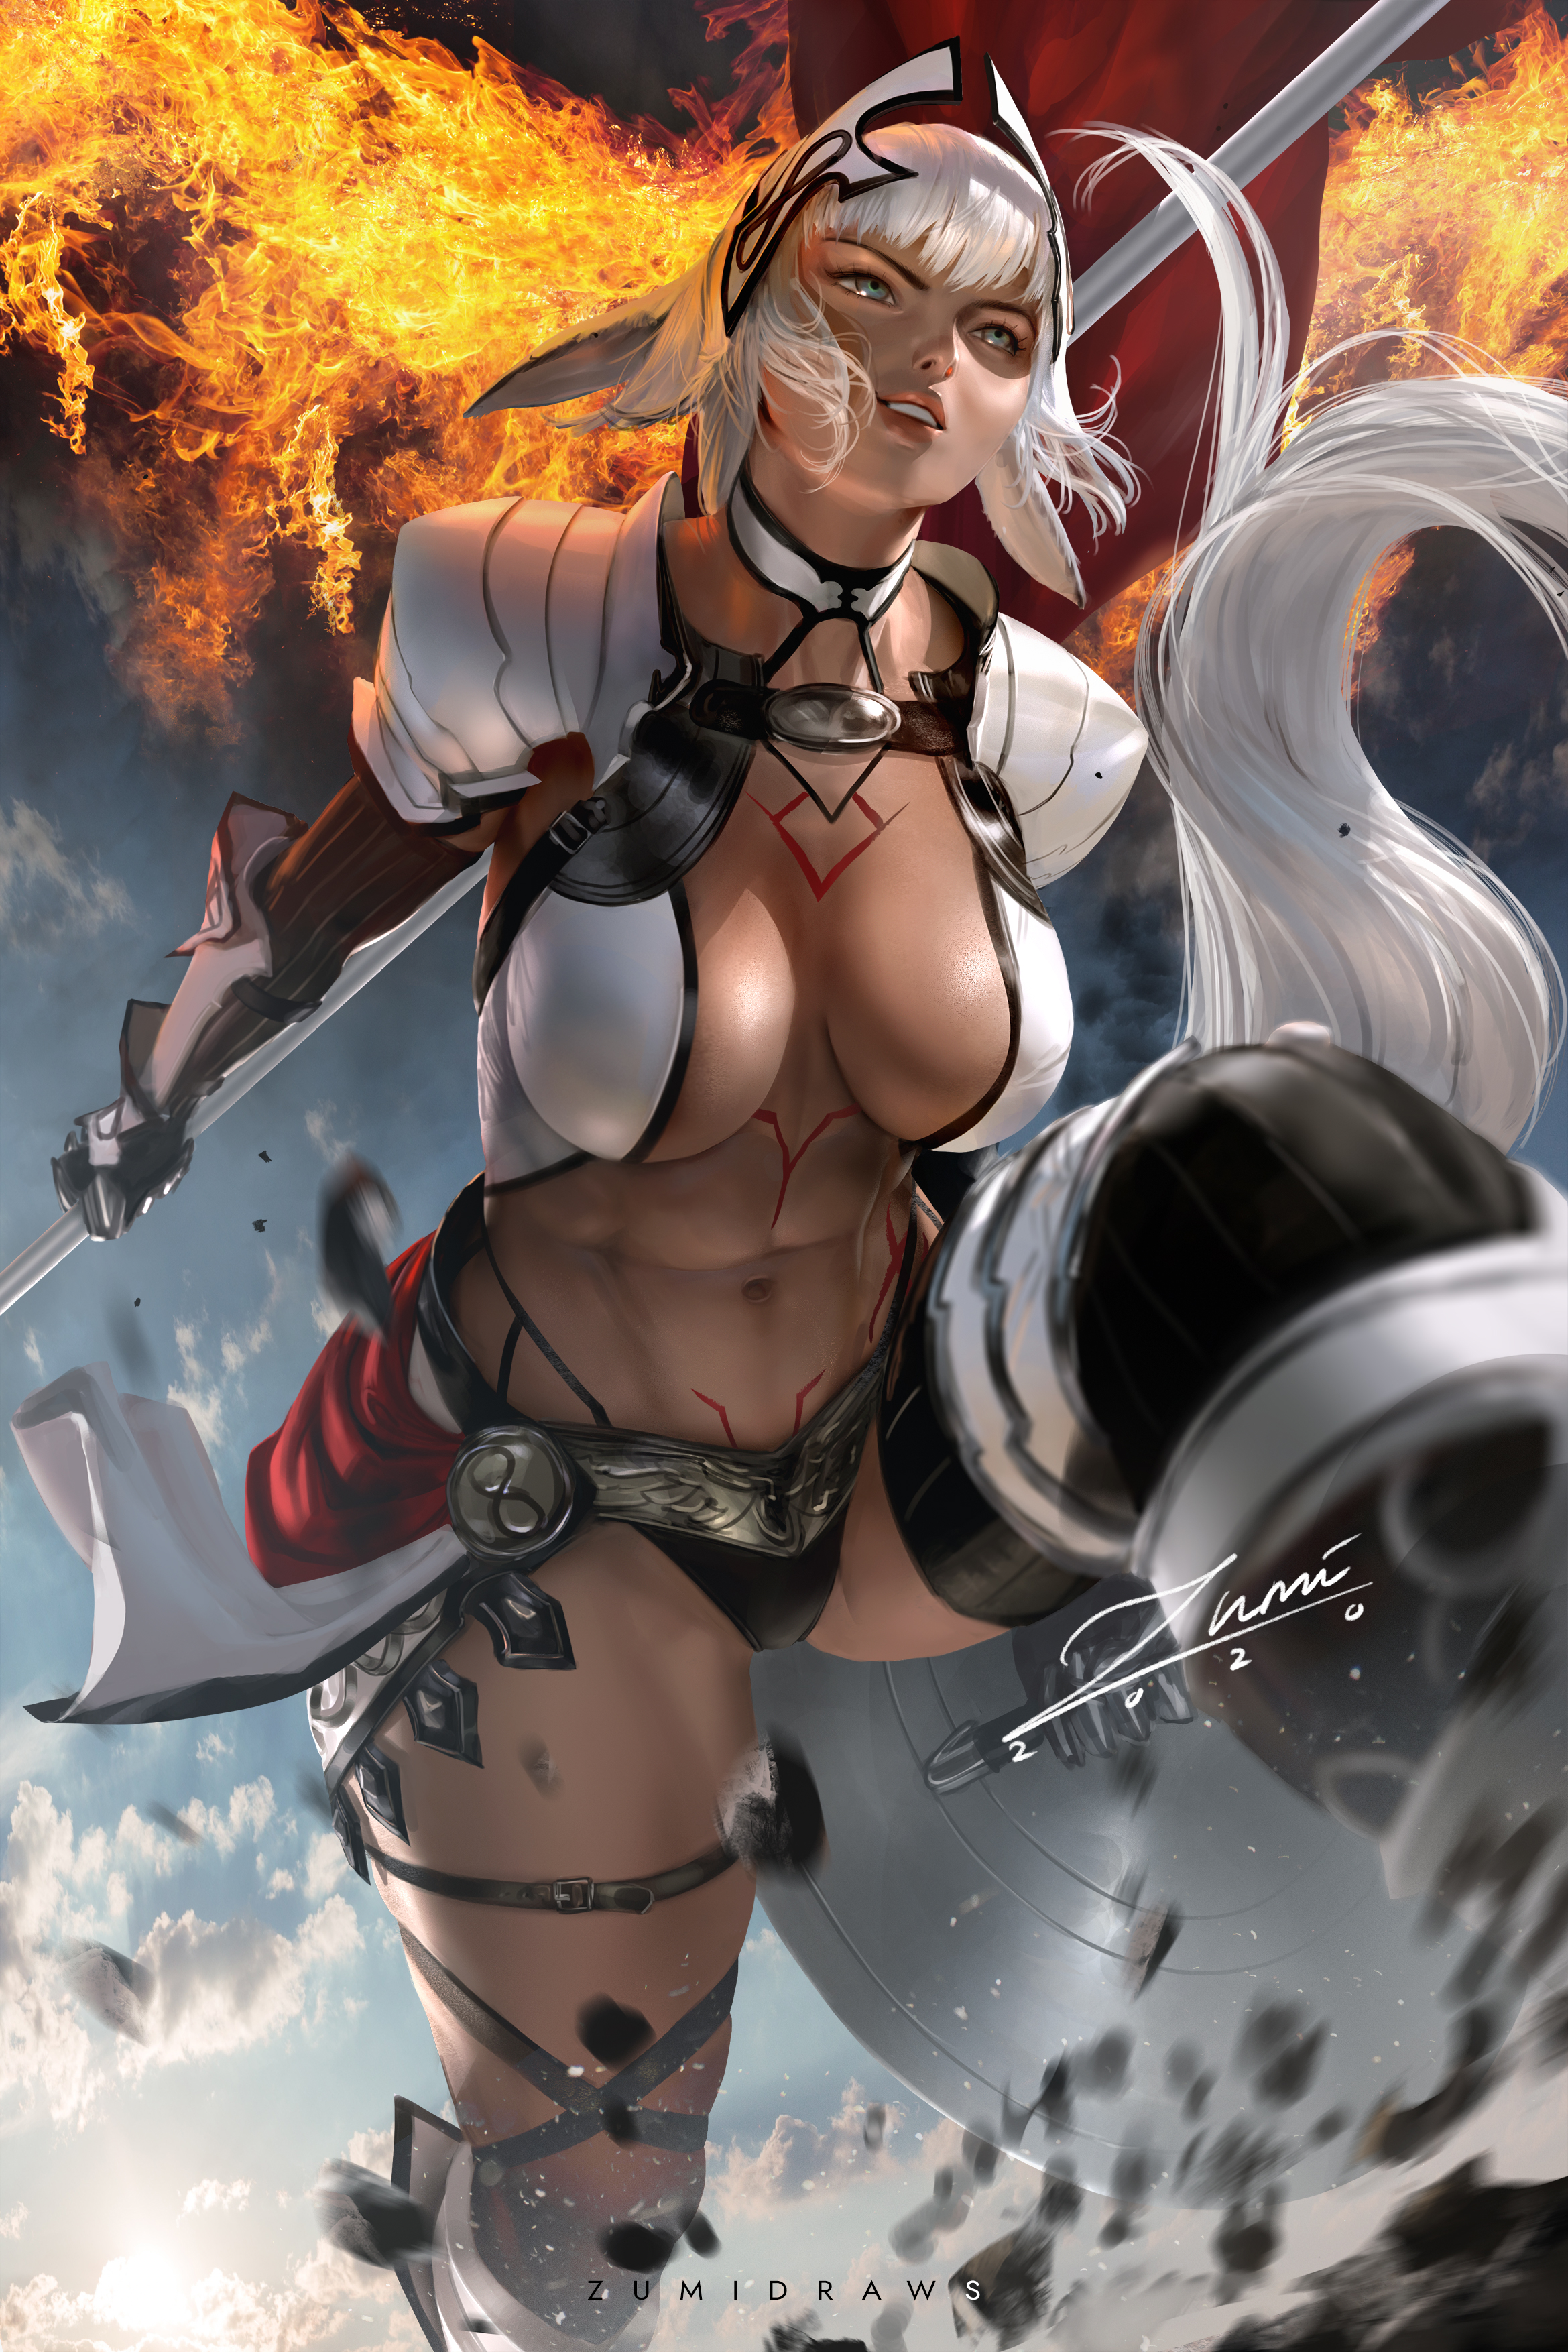 Anime 2339x3508 Caenis Fate/Grand Order Fate series anime anime girls silver hair bangs long hair animal ears fantasy girl skimpy clothes armor female warrior looking away smiling low-angle spear shield weapon straps thigh strap cleavage belly arm warmers bokeh fire fantasy art women portrait display 2D illustration drawing artwork digital art fan art Zumi